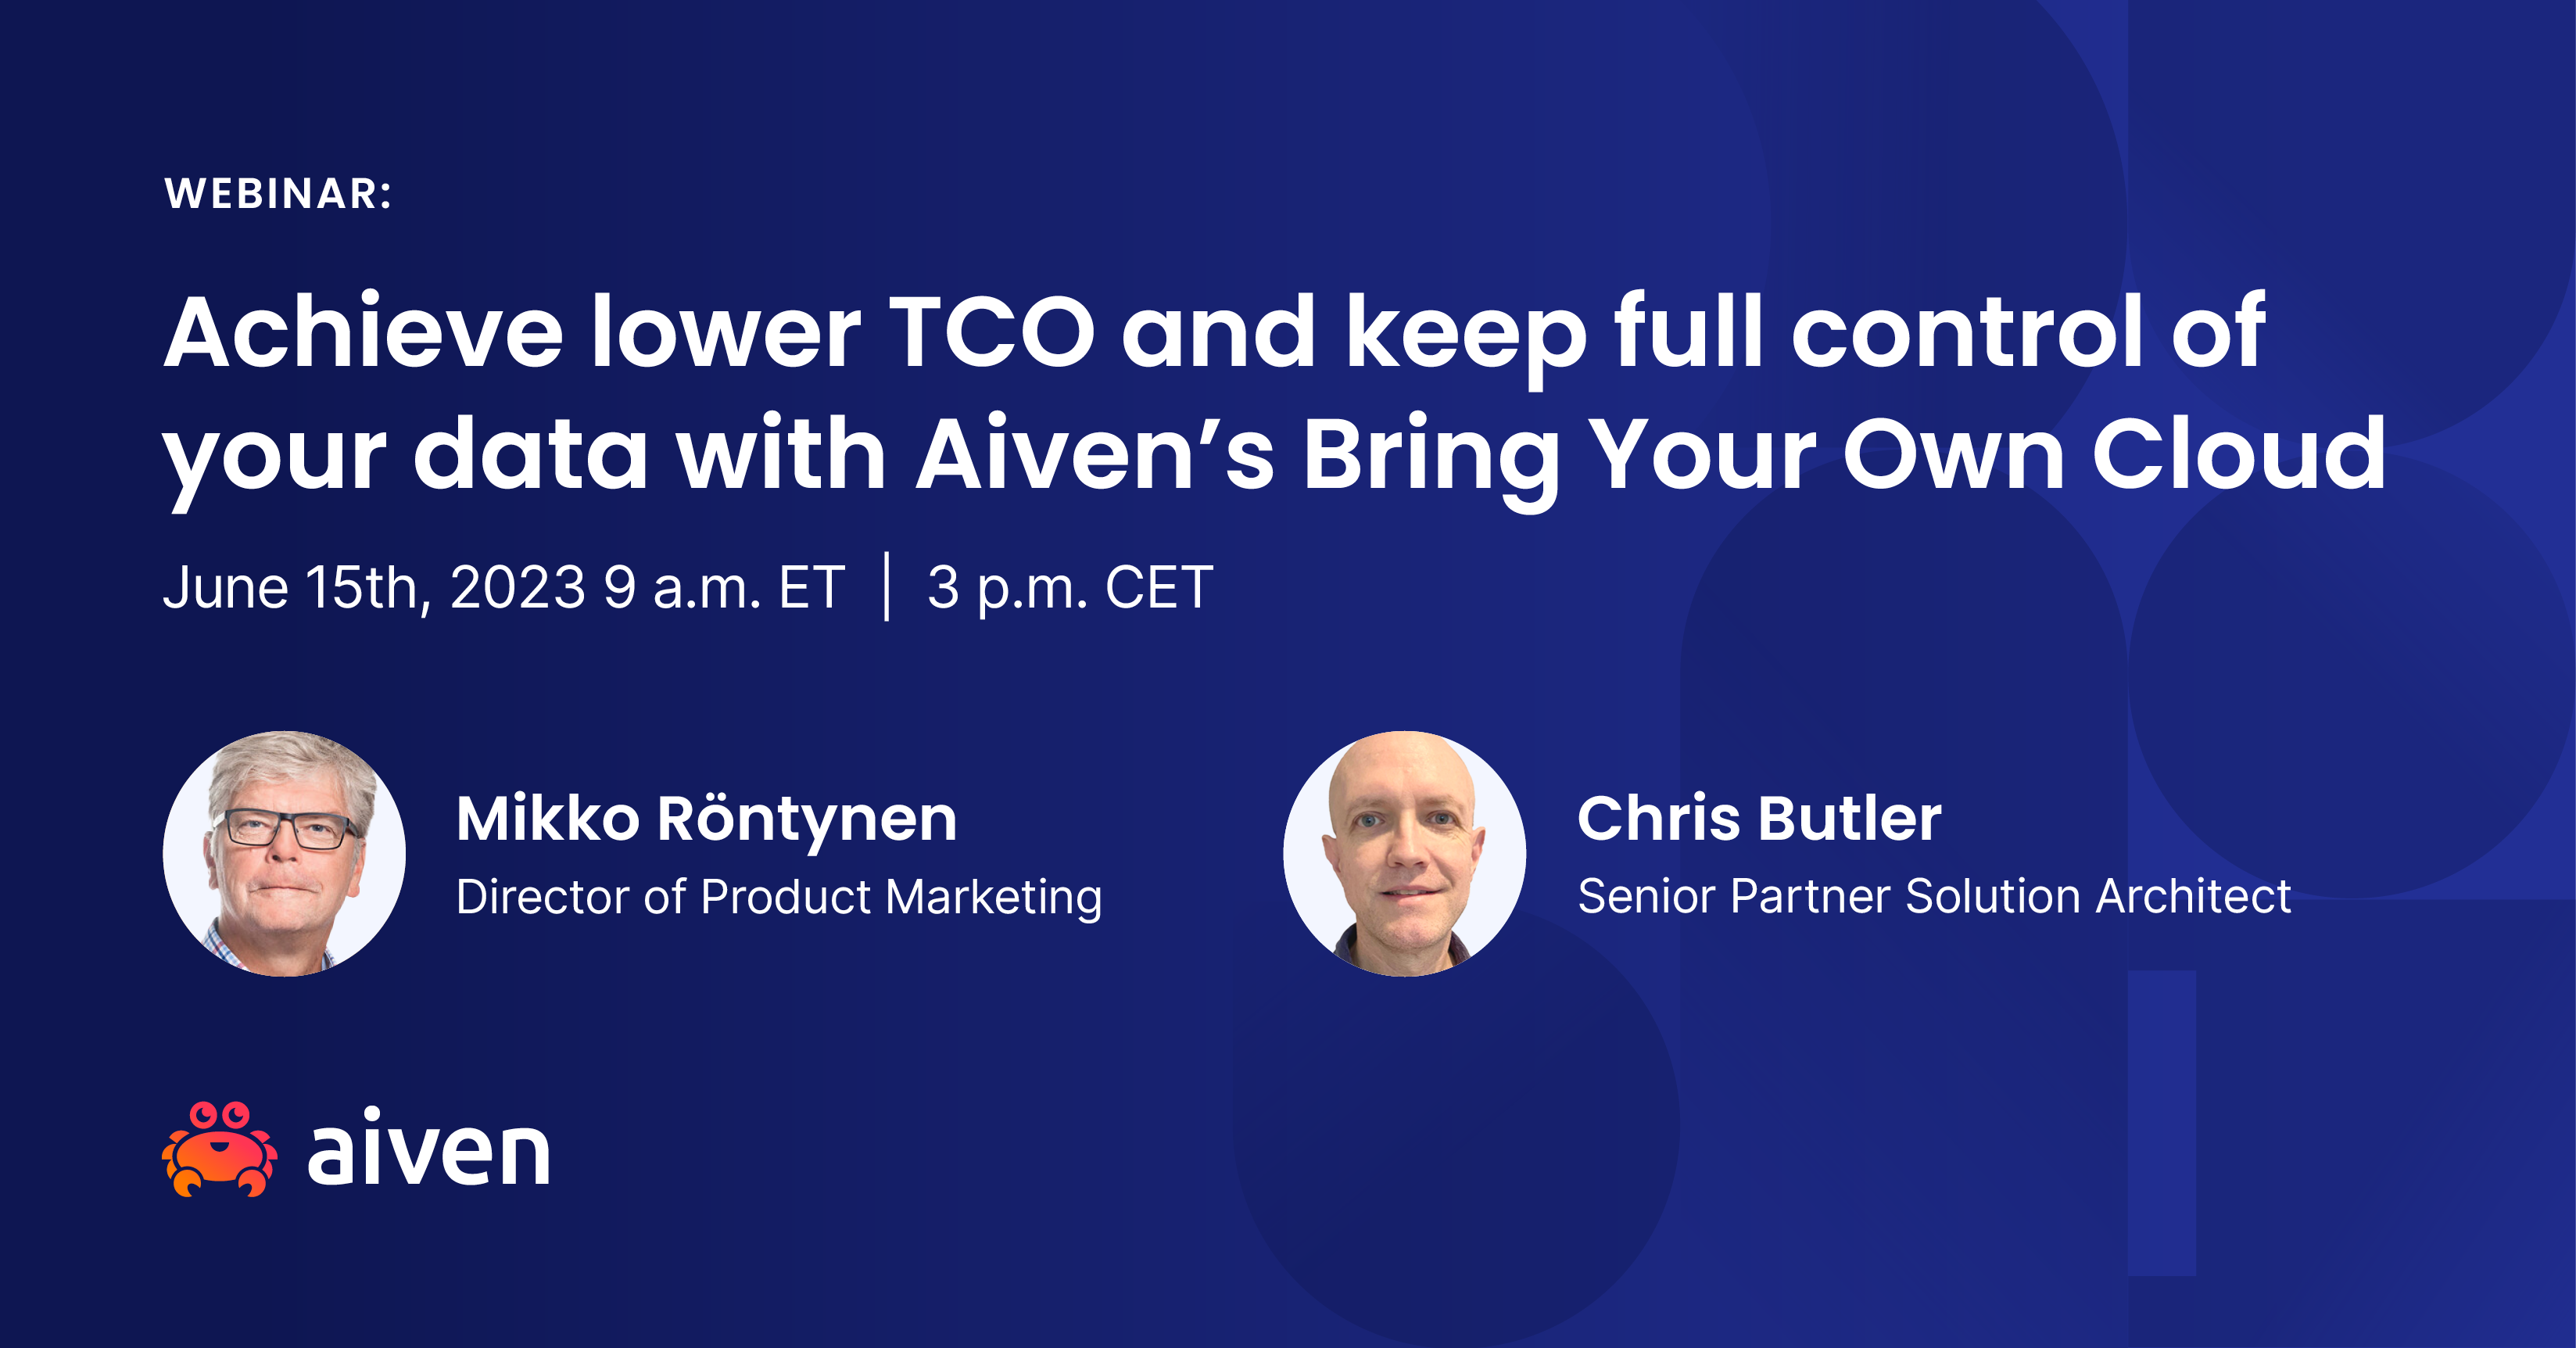 Achieve lower TCO and keep full control of your data with Aiven’s Bring Your Own Cloud illustration